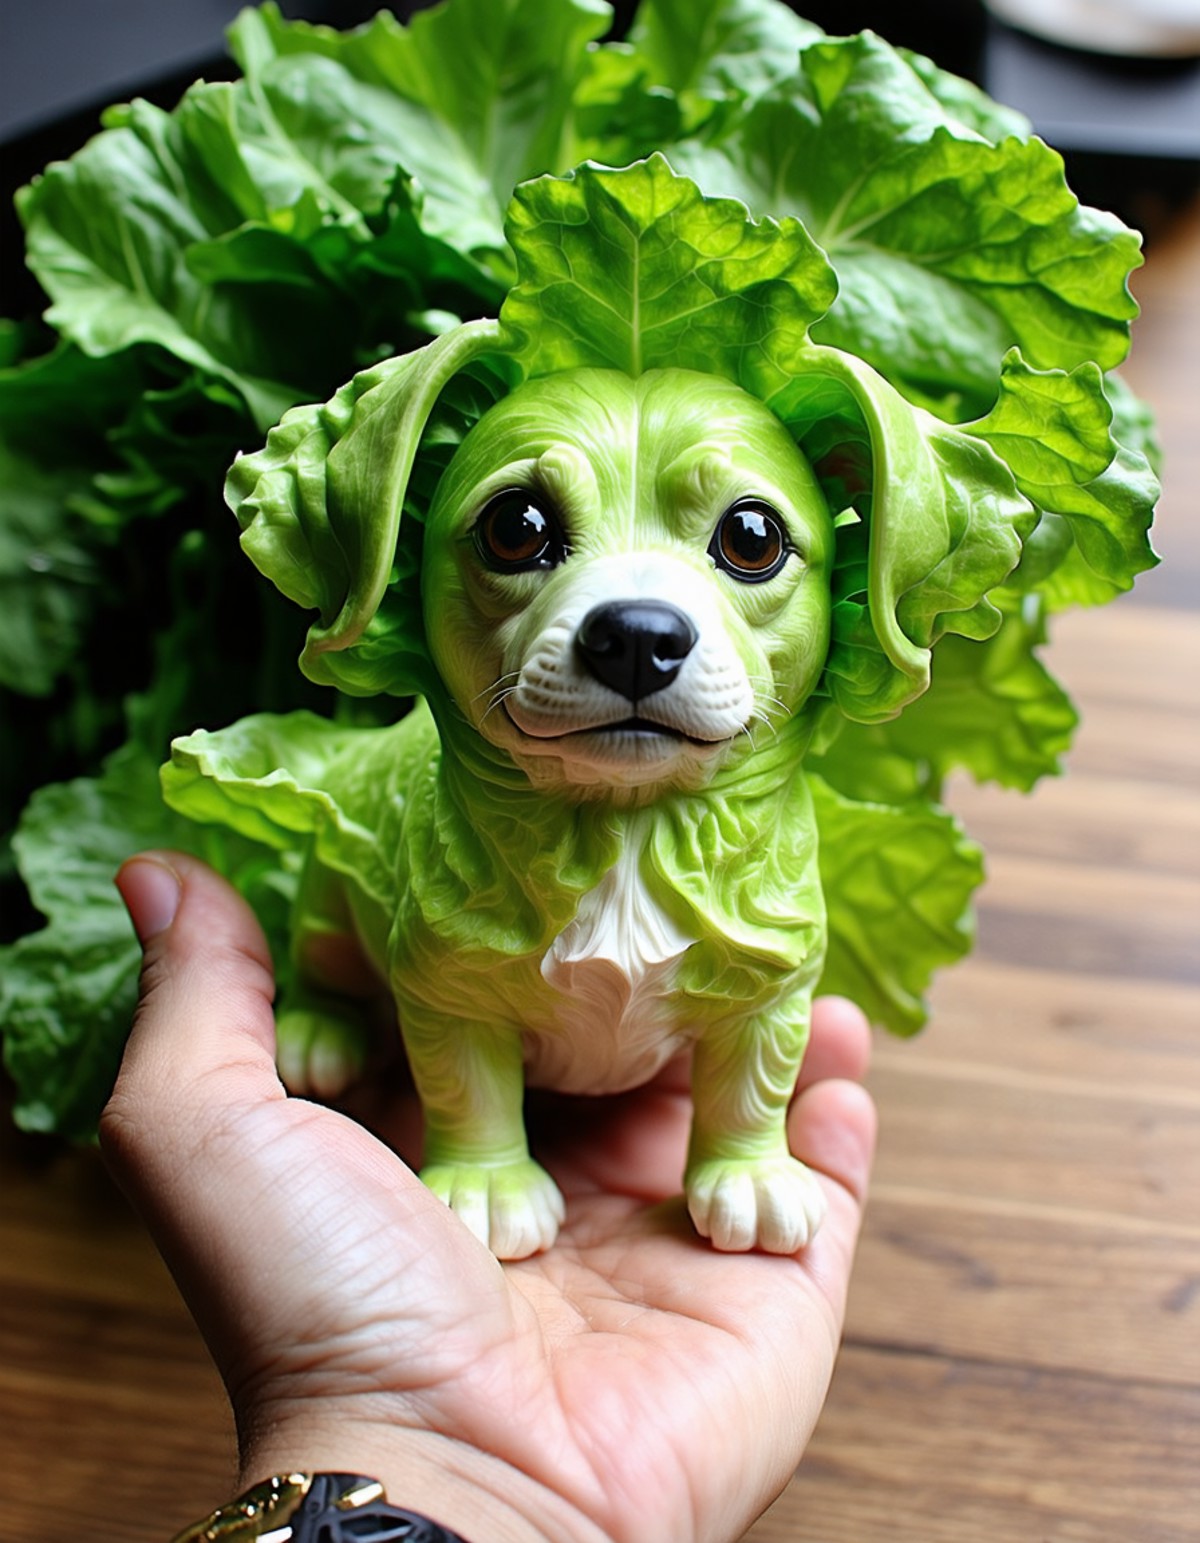 A hand holding a small hybrid between a dog and lettuce. 